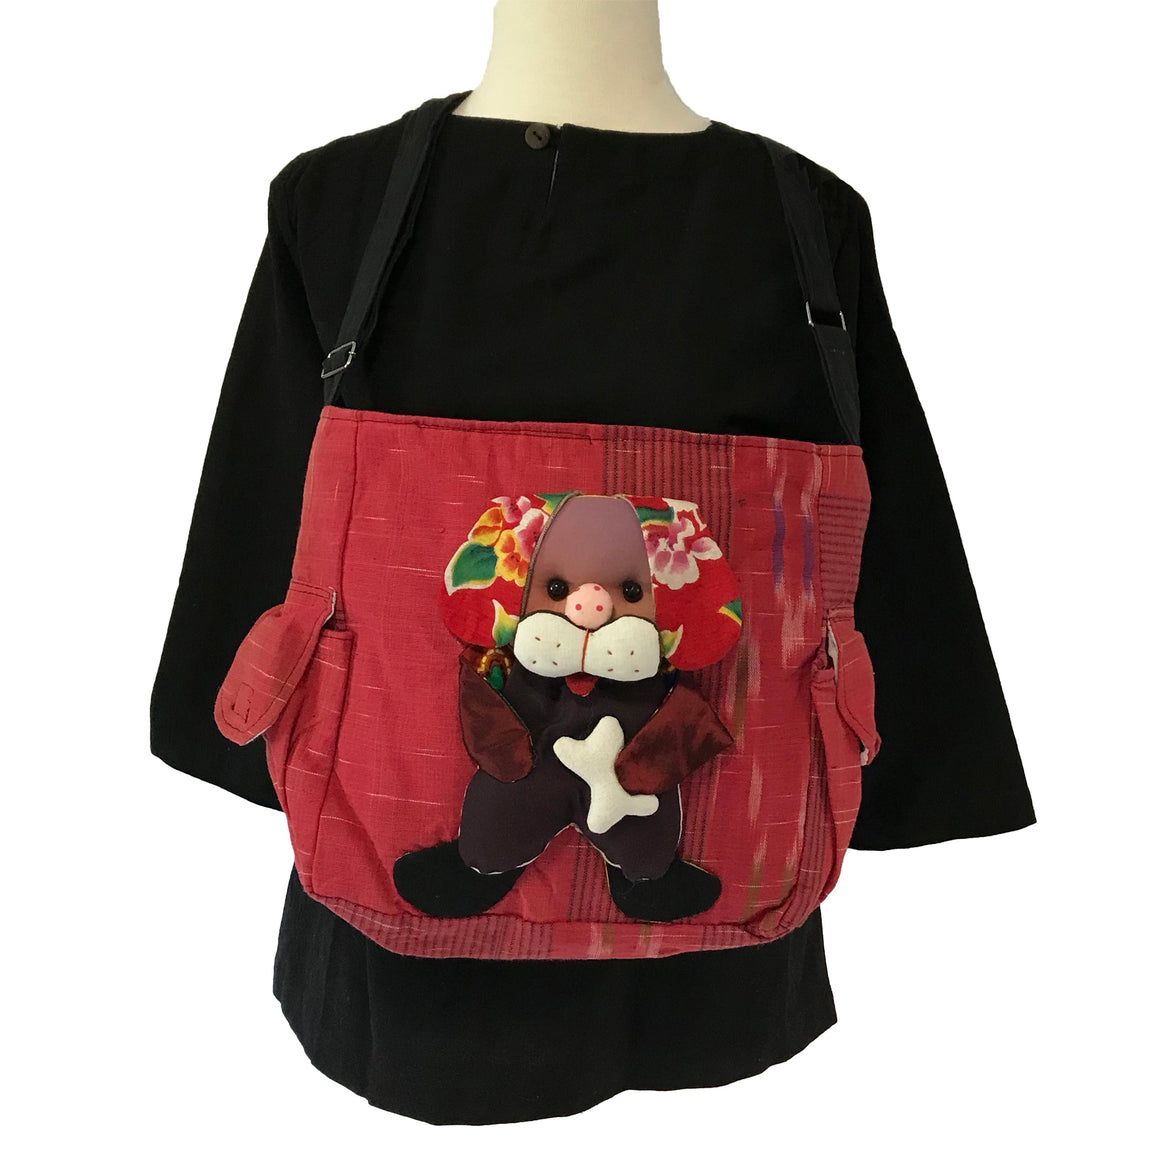 PUPPY DOG HANDMADE CROSS BODY BAG ~ RED BAGS & PURSES ZENZOEY JEWELRY & ACCESSORIES 